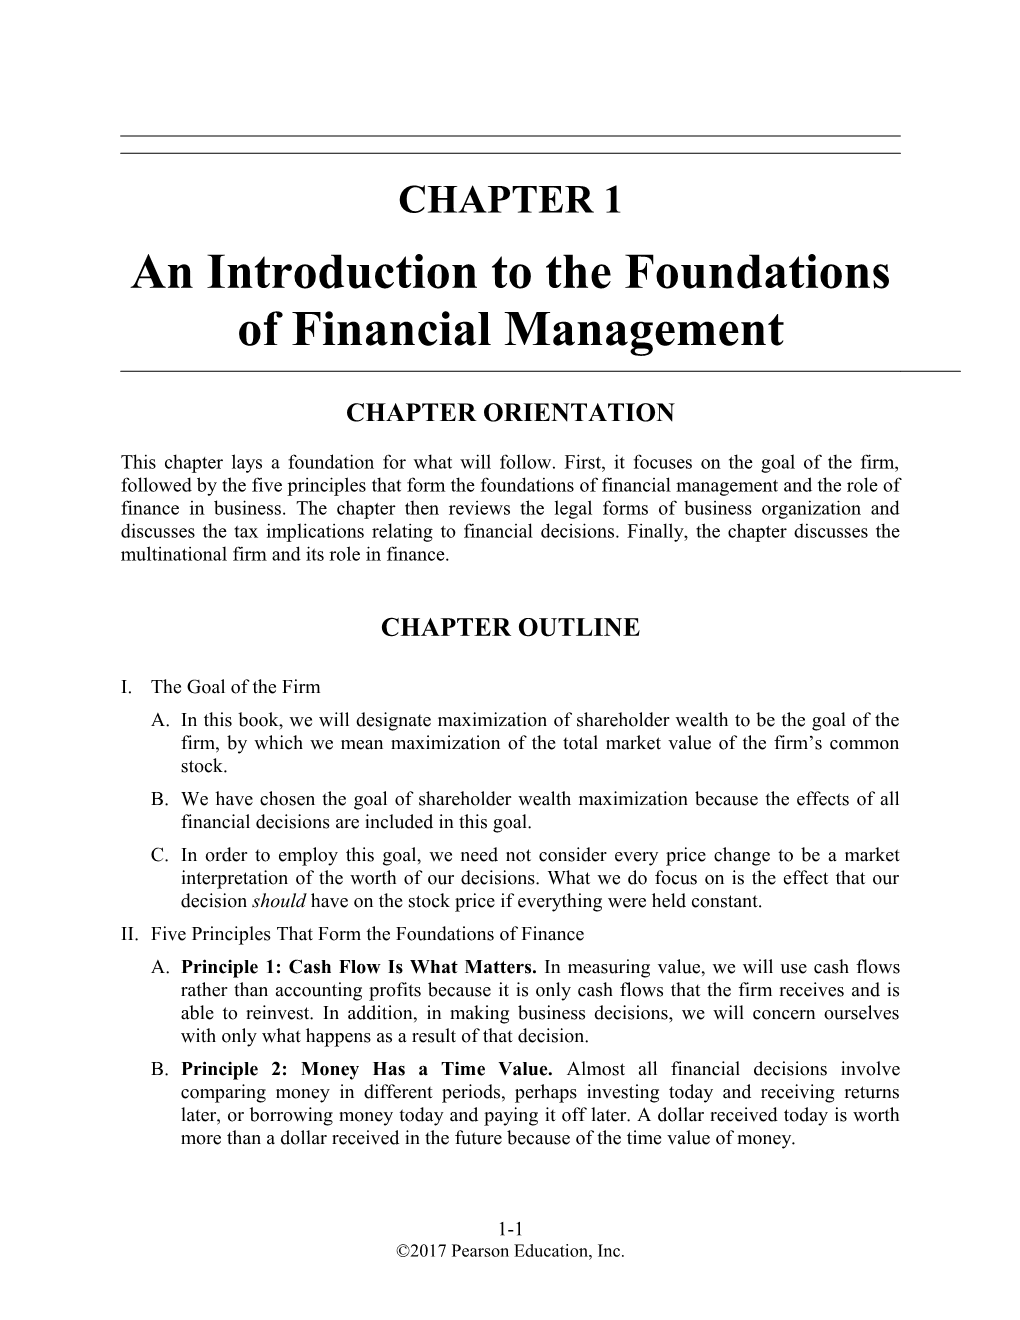 An Introduction to the Foundations of Financial Management